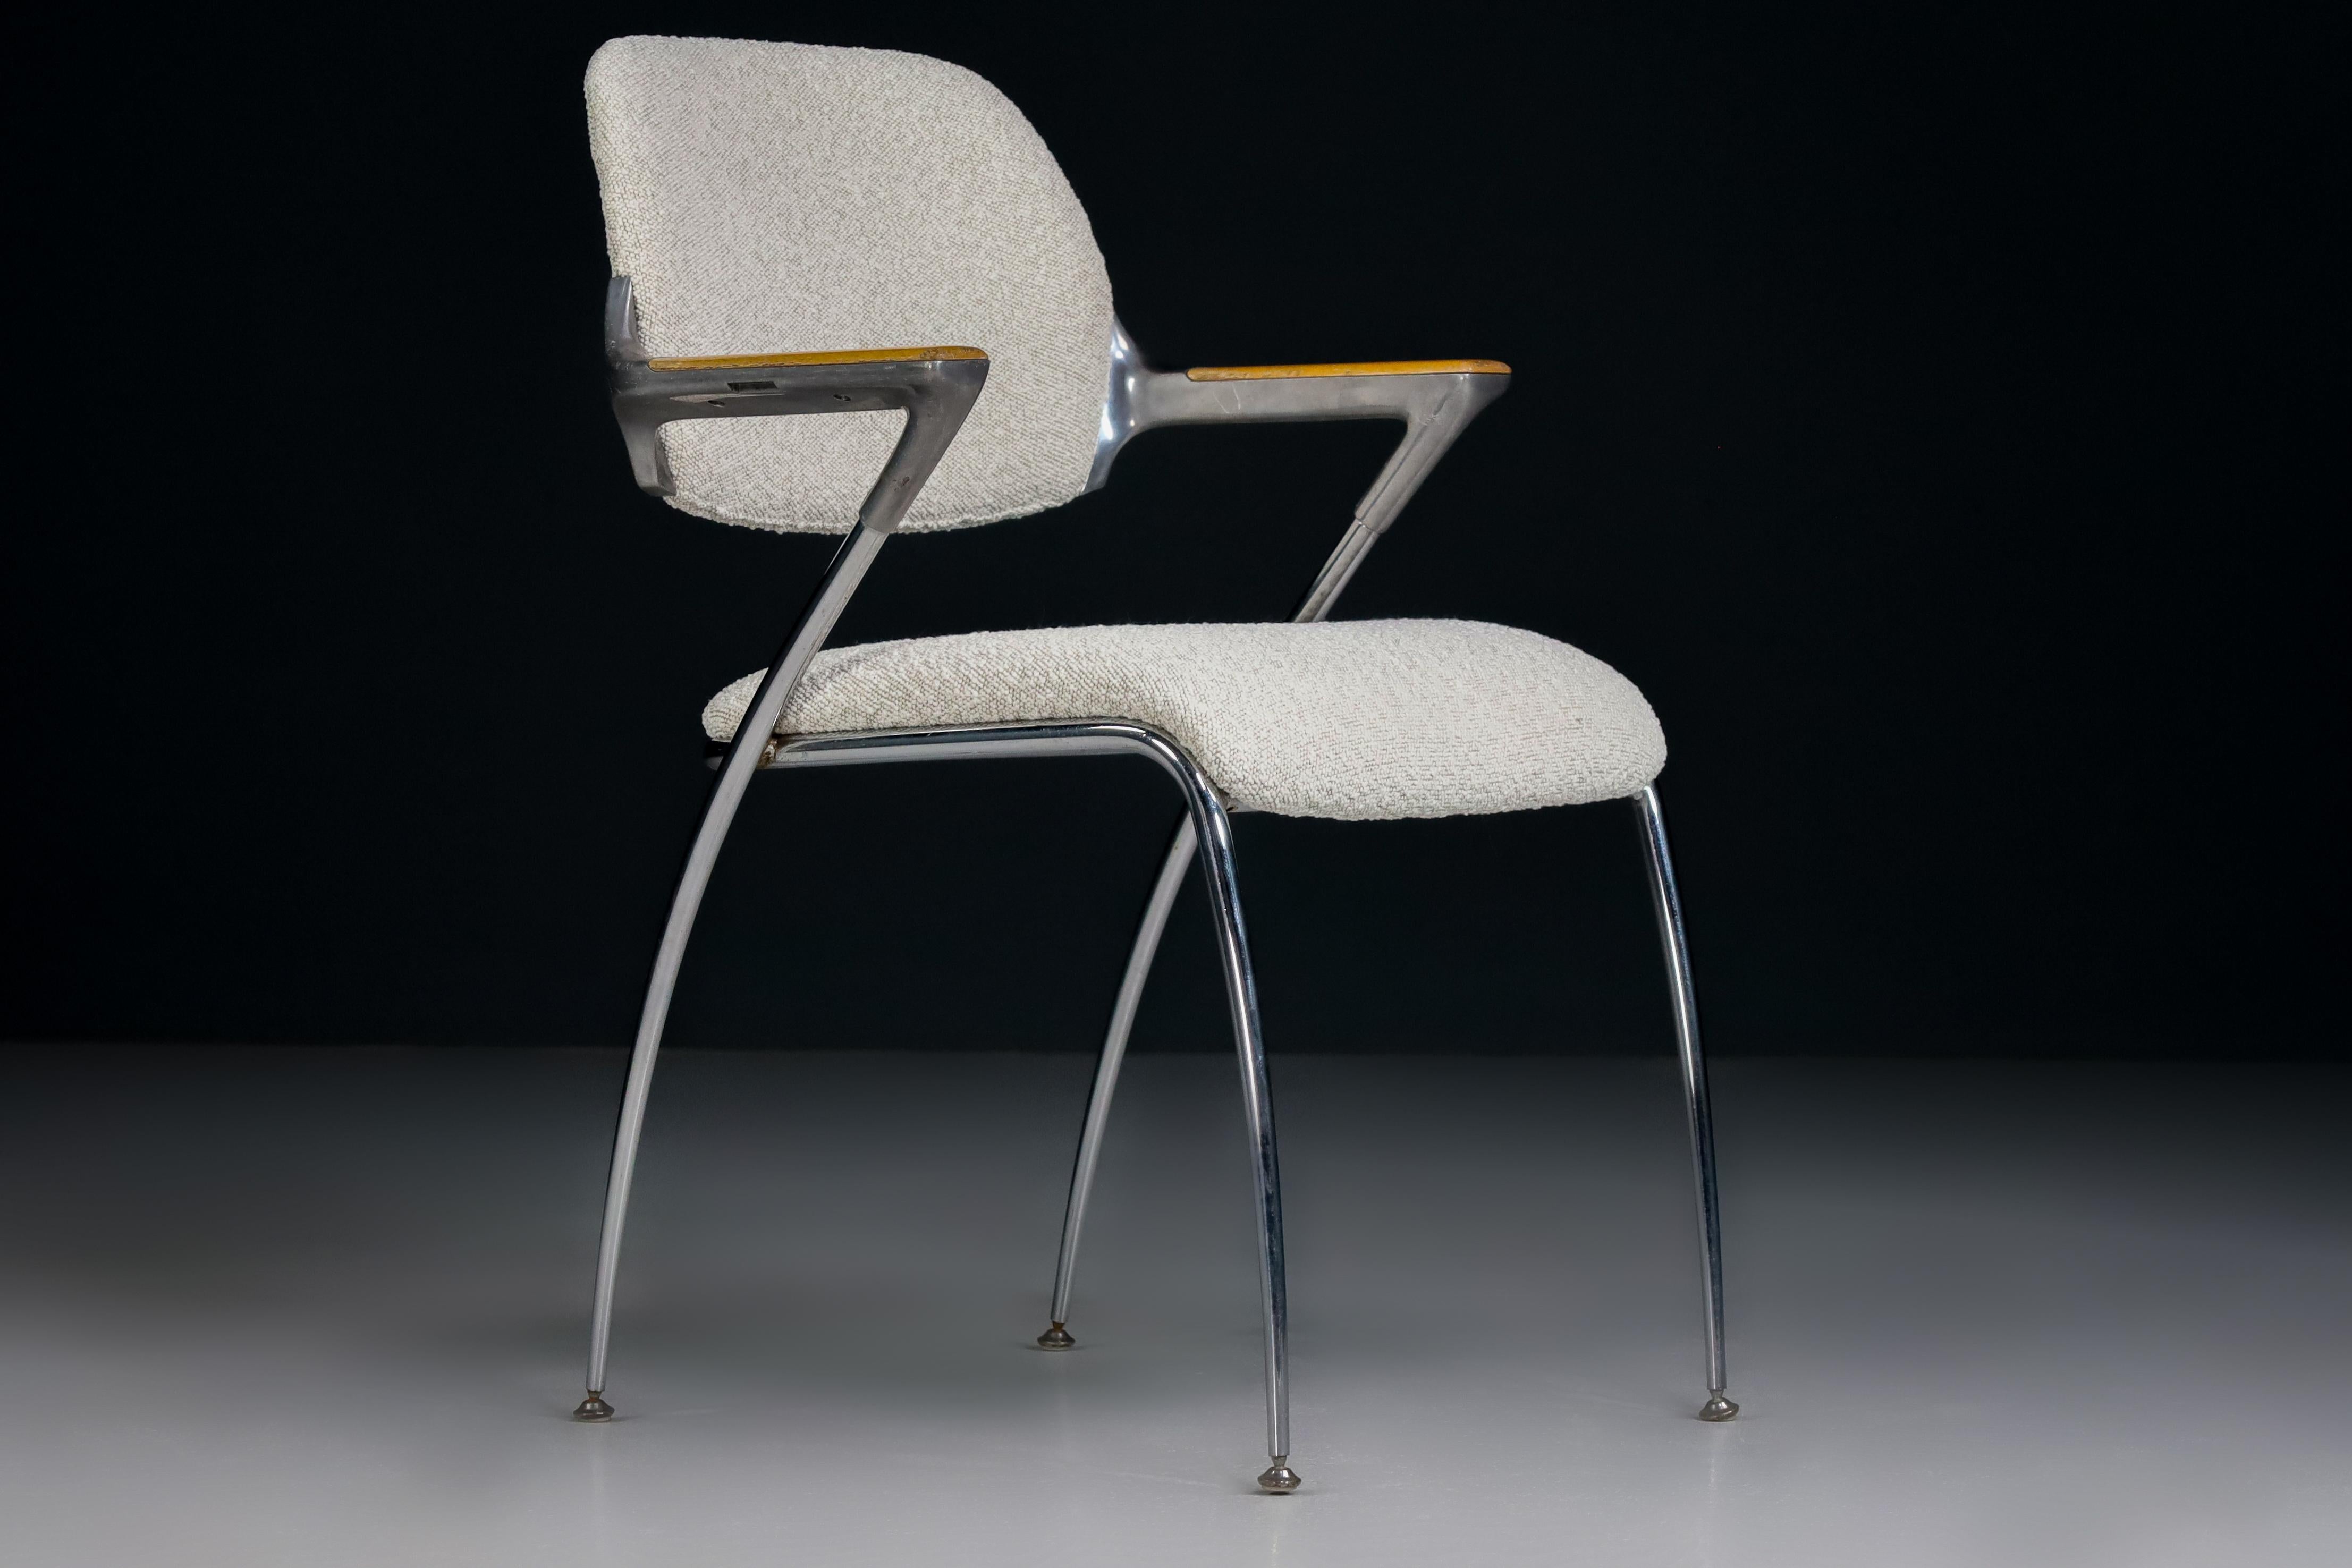 Moderne Francesco Zaccone for Thonet Golf Chairs in New Bouclé Upholstery, Allemagne 1970 en vente